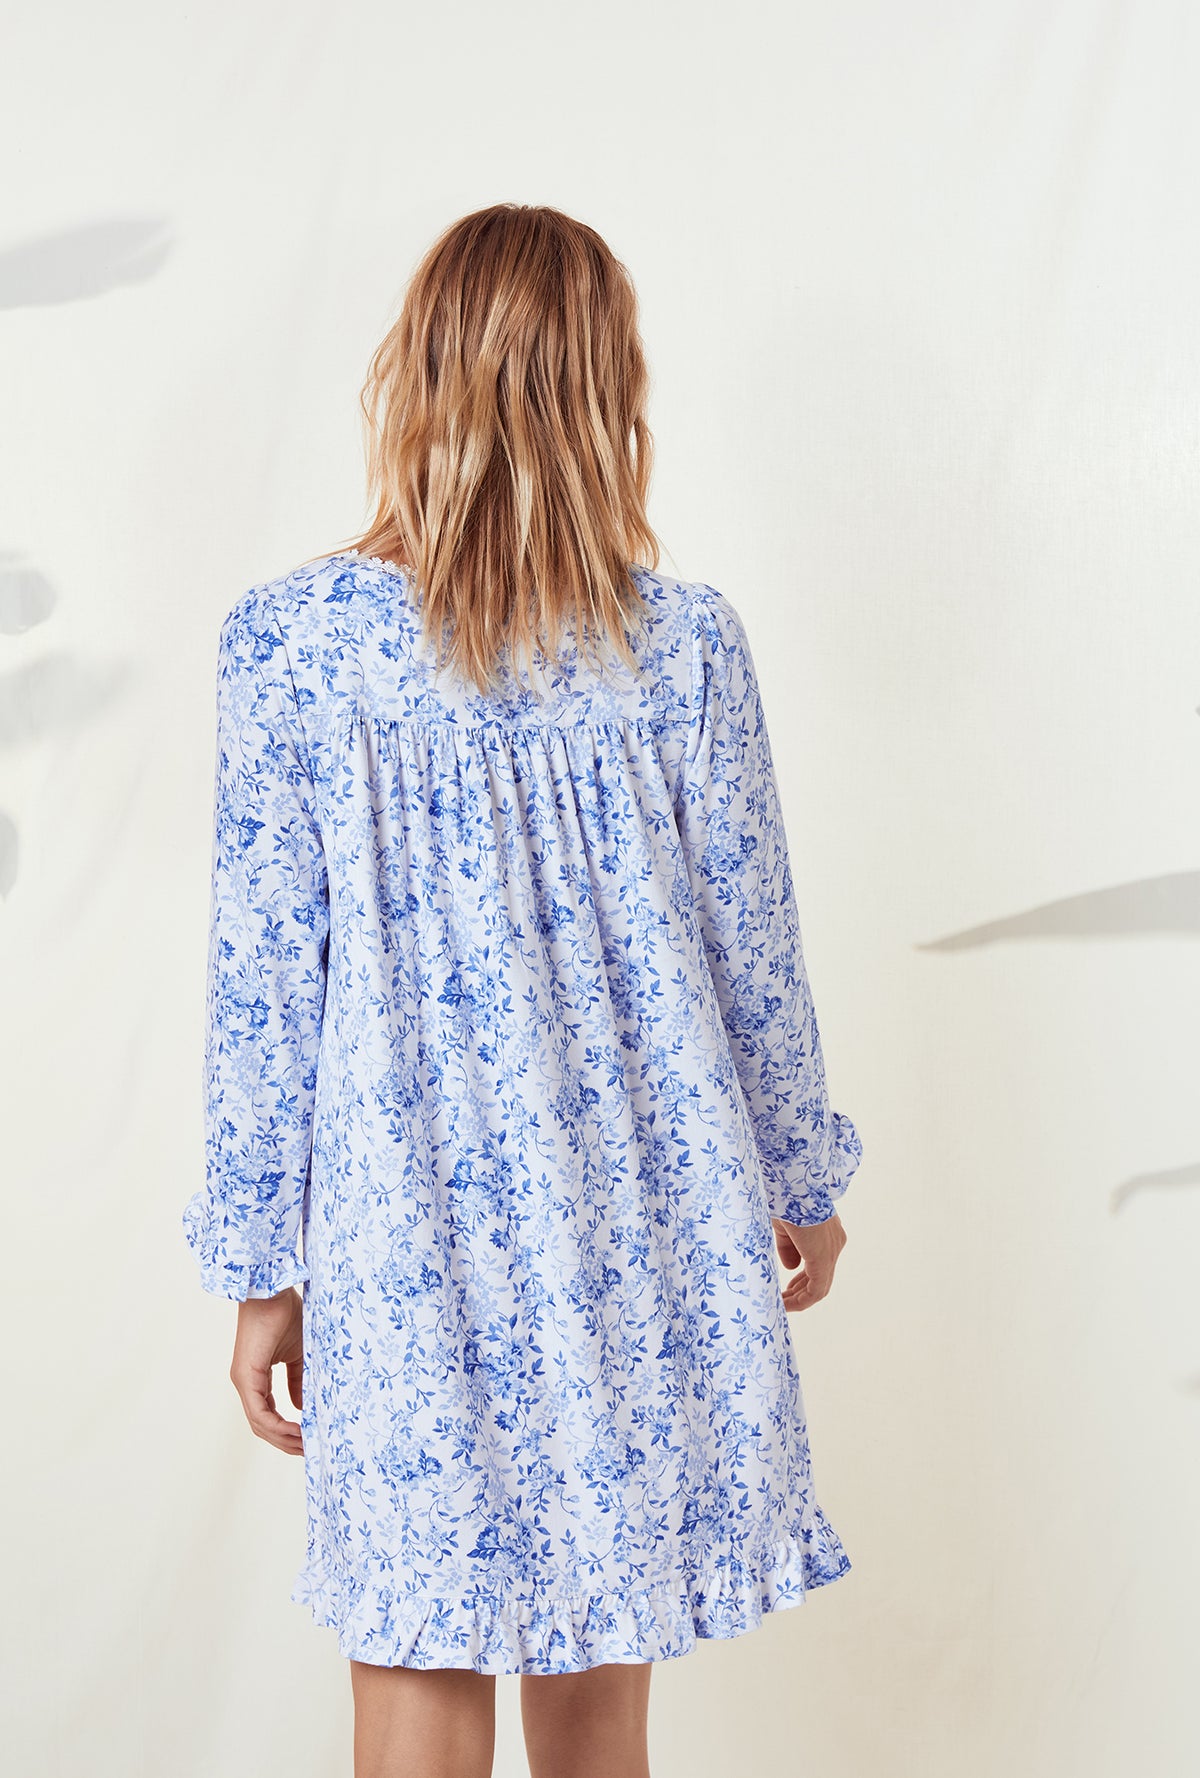 A lady wearing a blue floral long sleeve knit short nightgown.